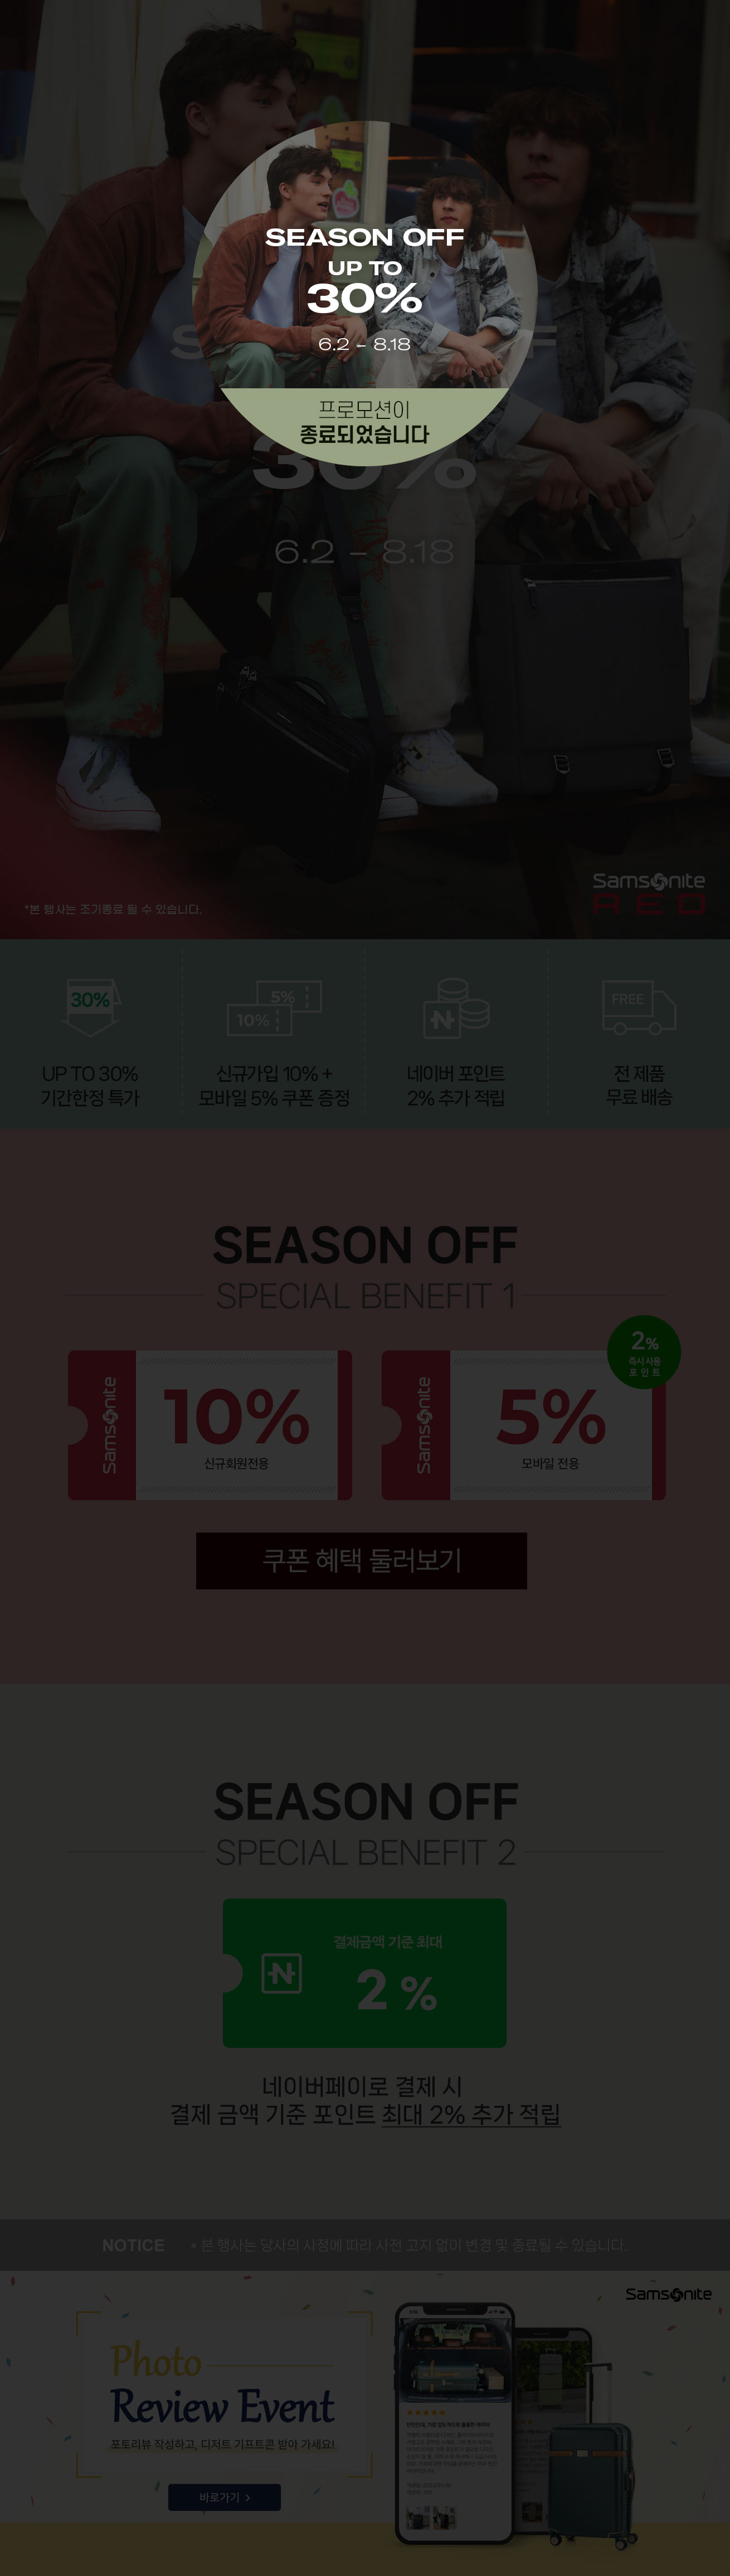 SEASON OFF UP TO 30%